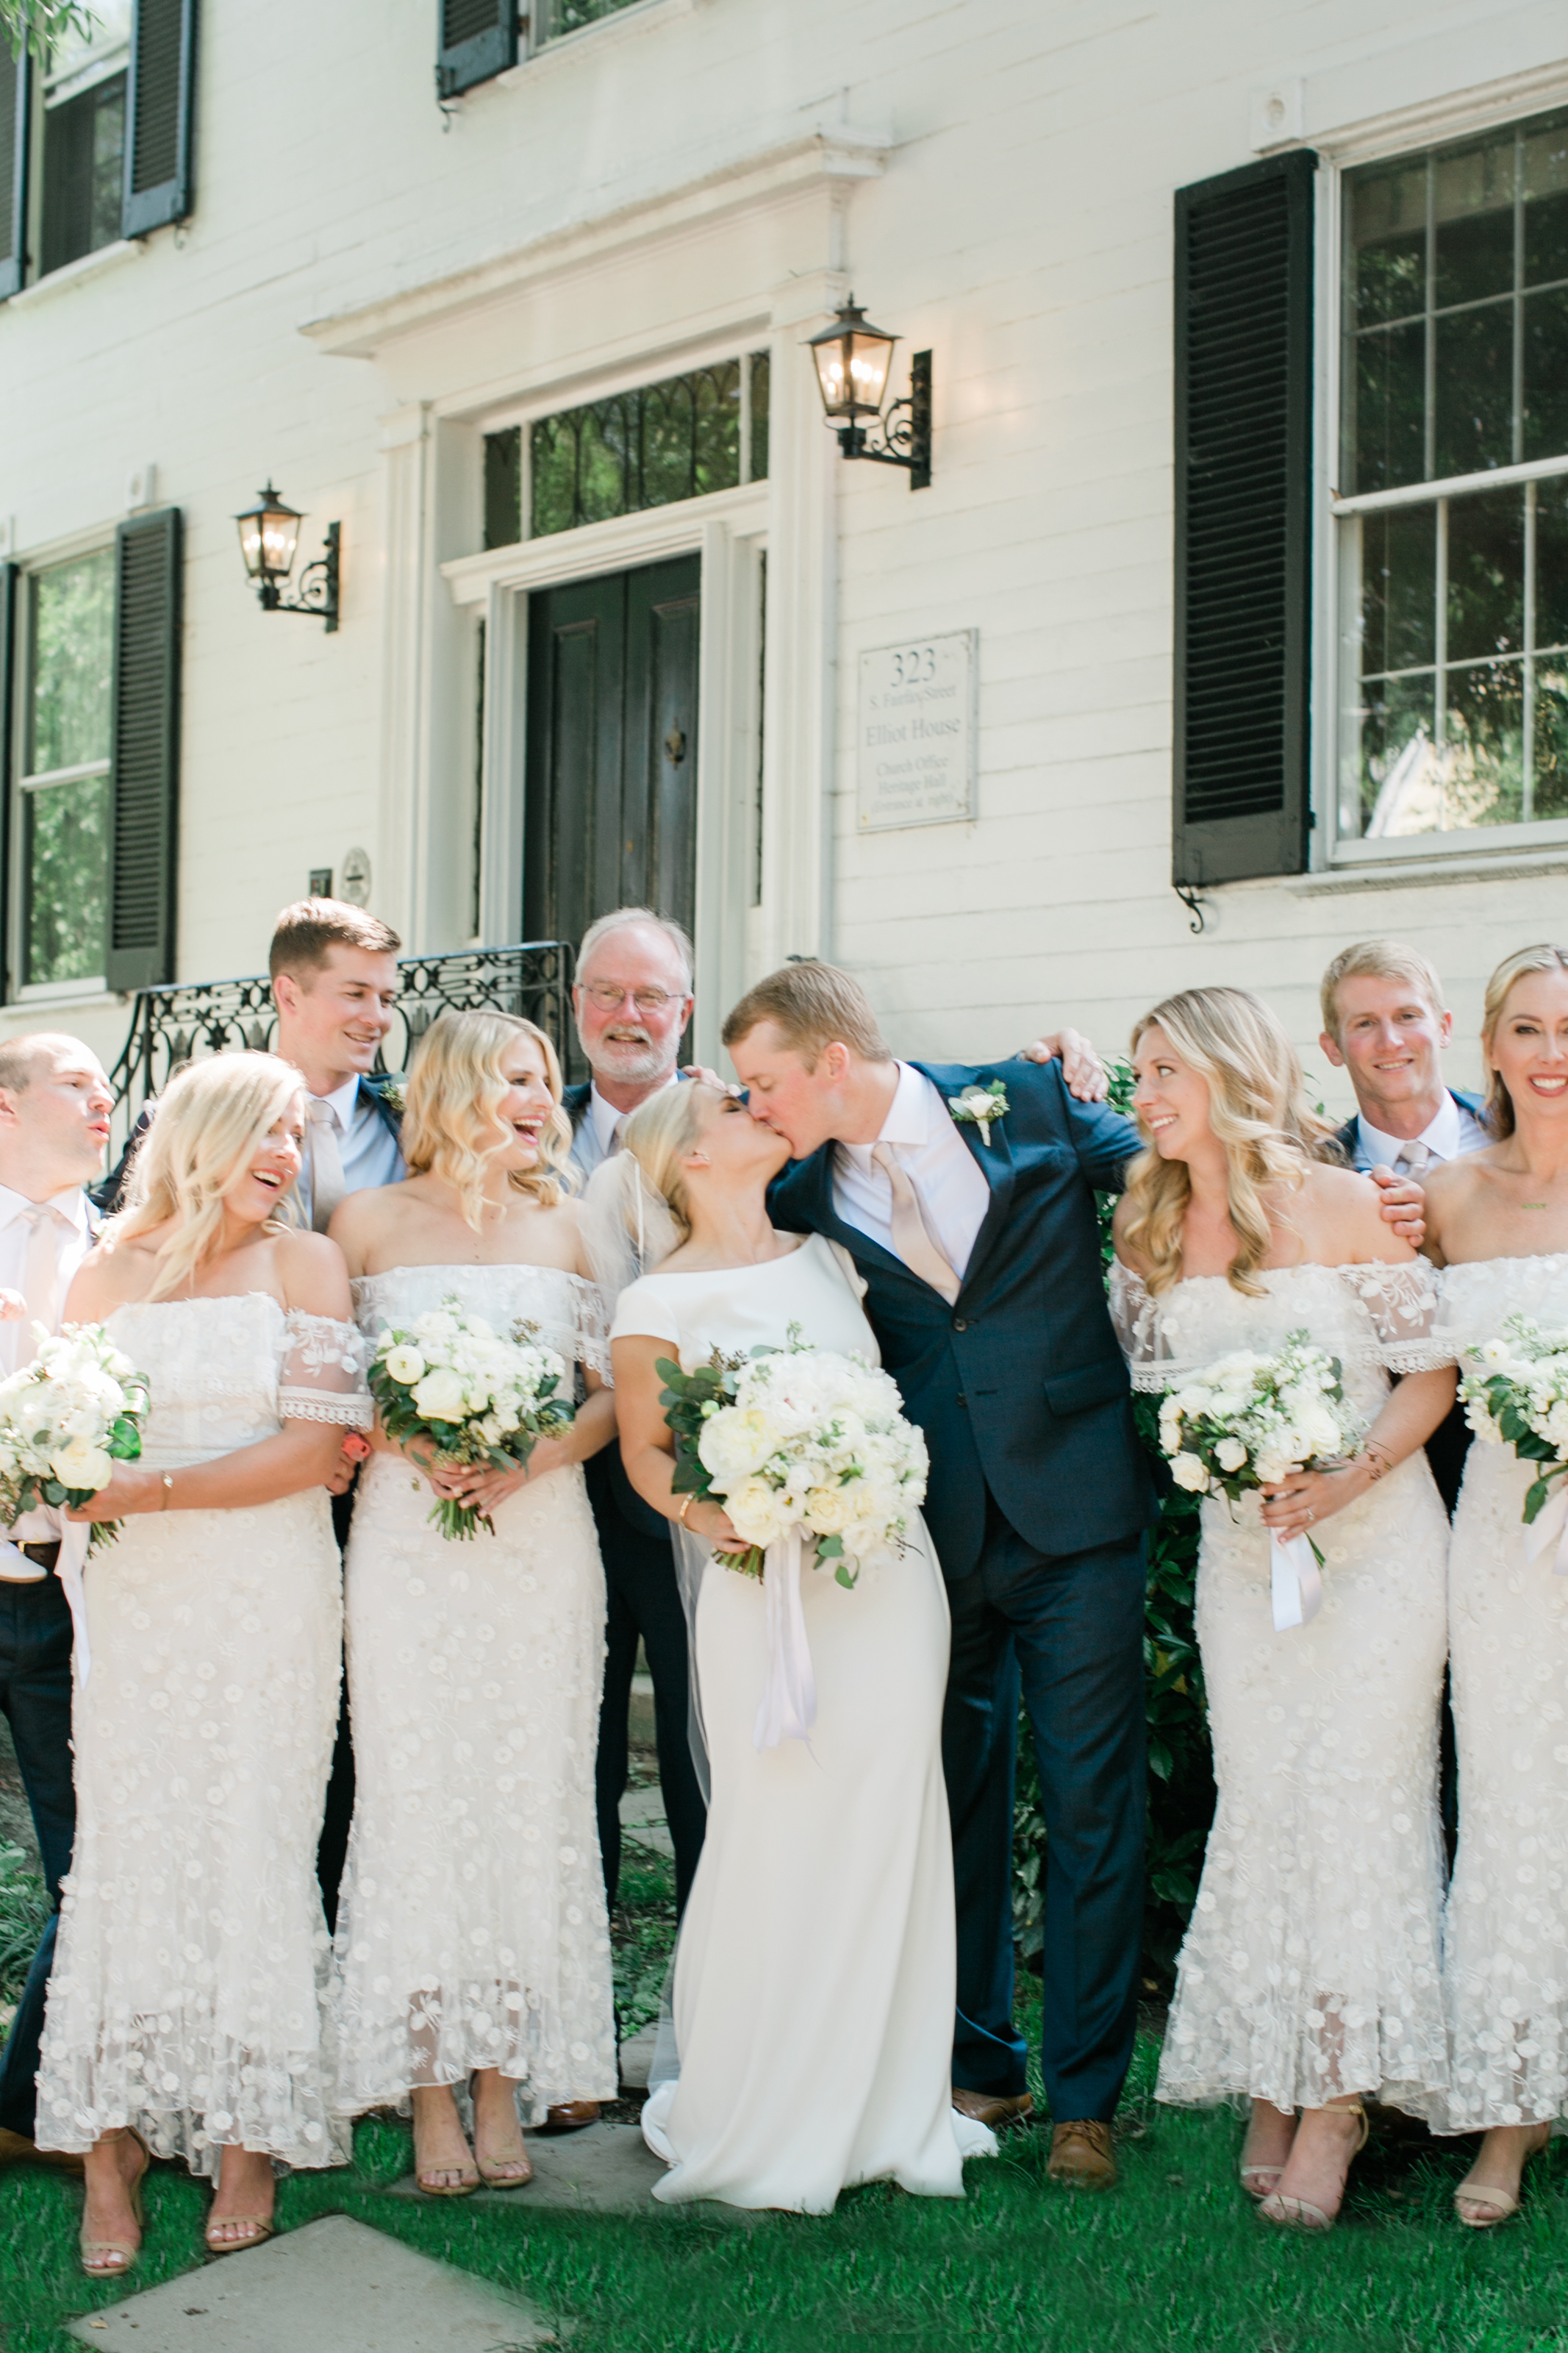 Bride and groom kiss in between bridal party